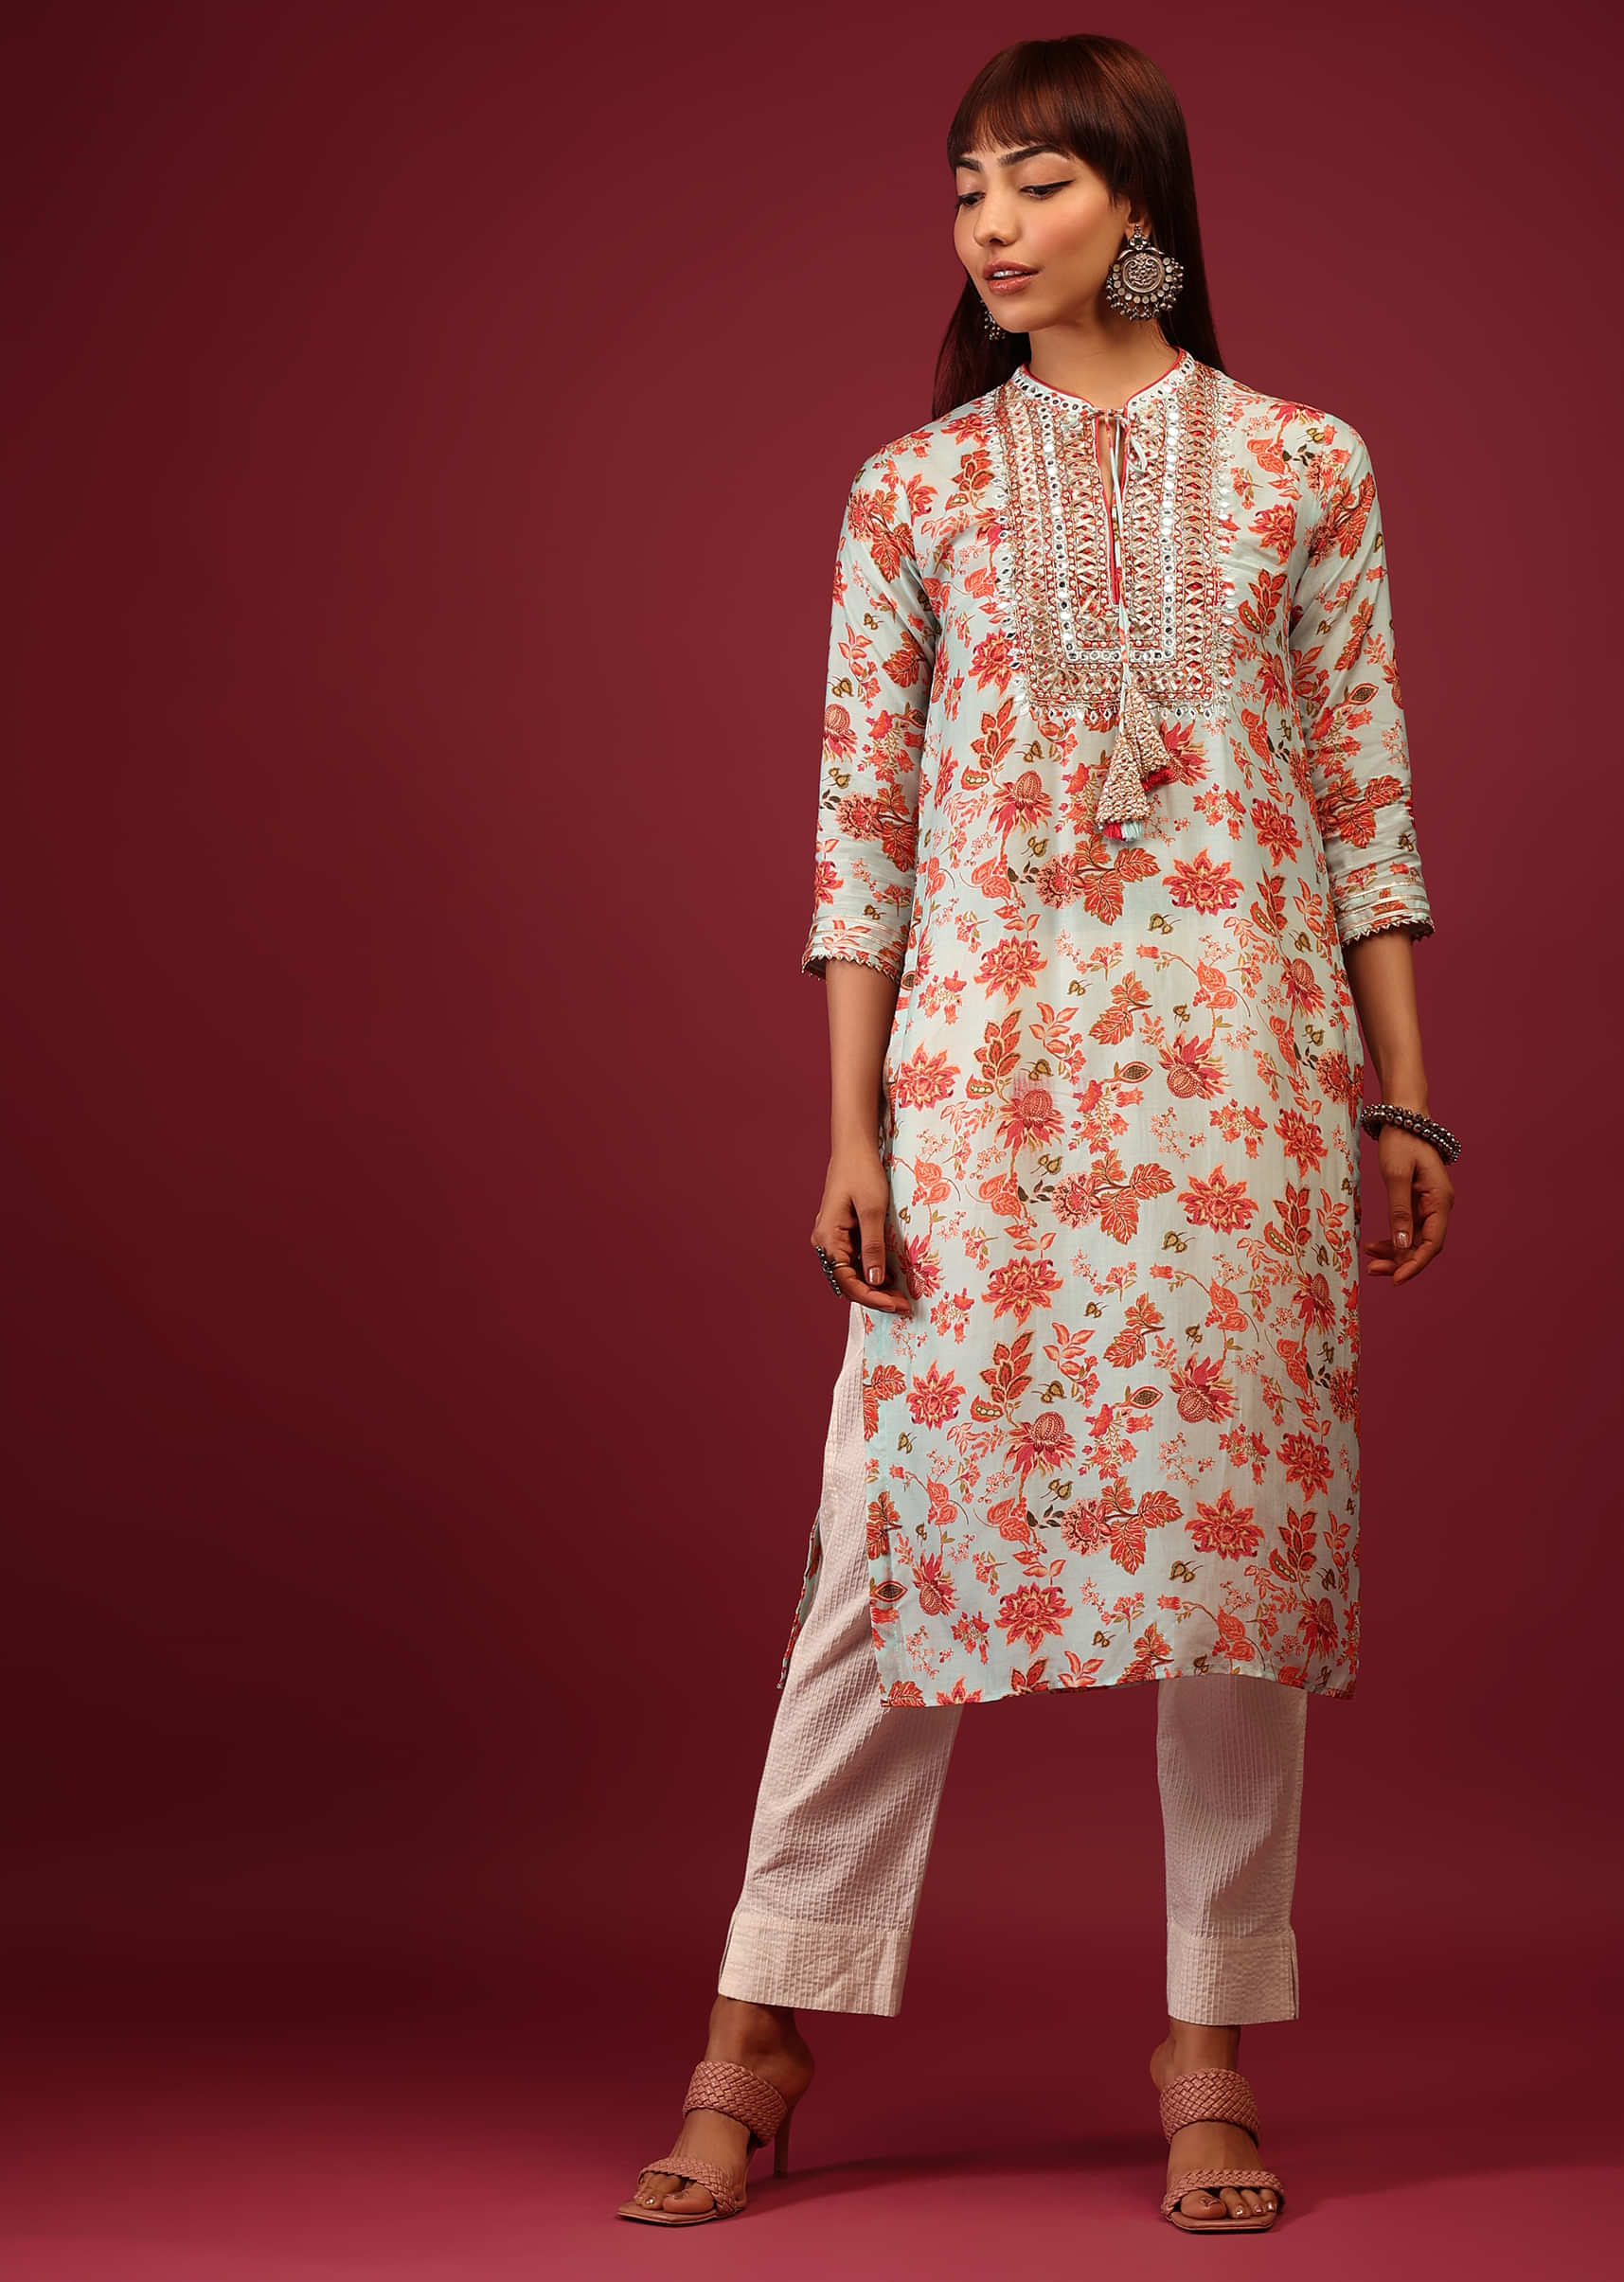 Glass Blue Floral Print Cotton Kurta In Straight Cut With Gotta Work Embroidered Bodice